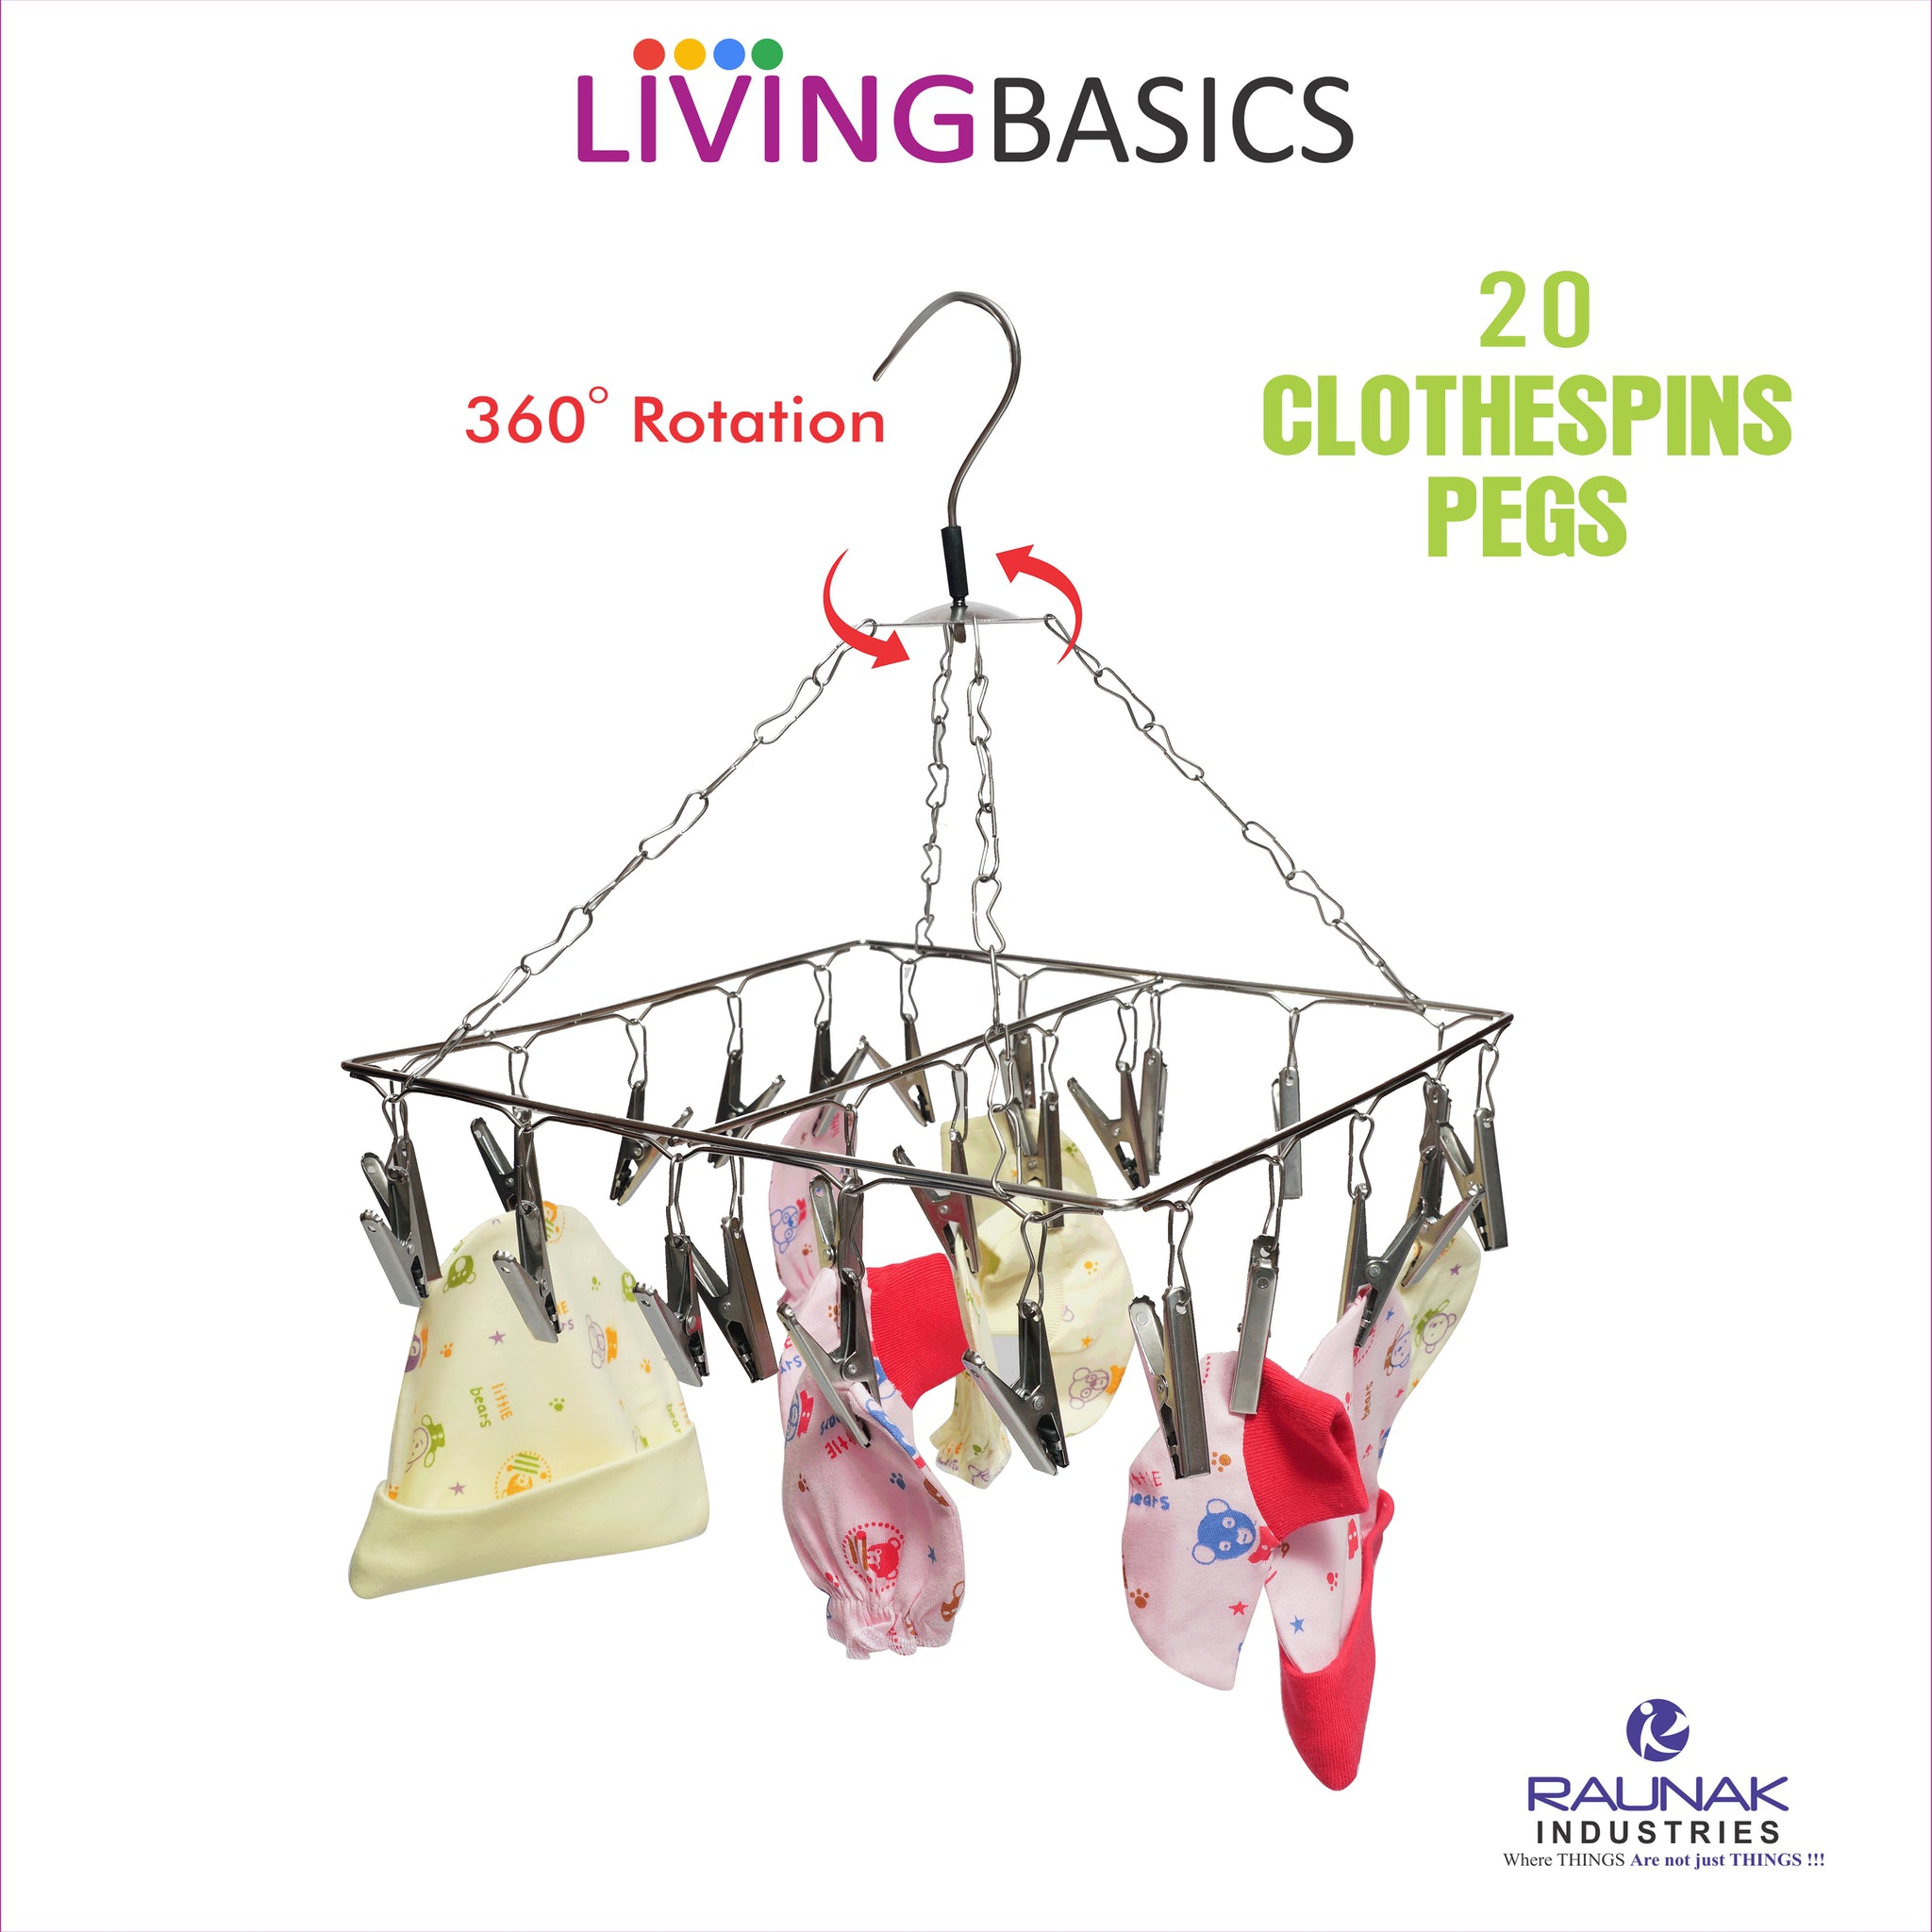 LivingBasics Heavy Duty Rust Free Cloth Peg/Clothes Clip/Cloth Drying Pins/Pegs for Hanger/Rods/Drying Clothes- Square